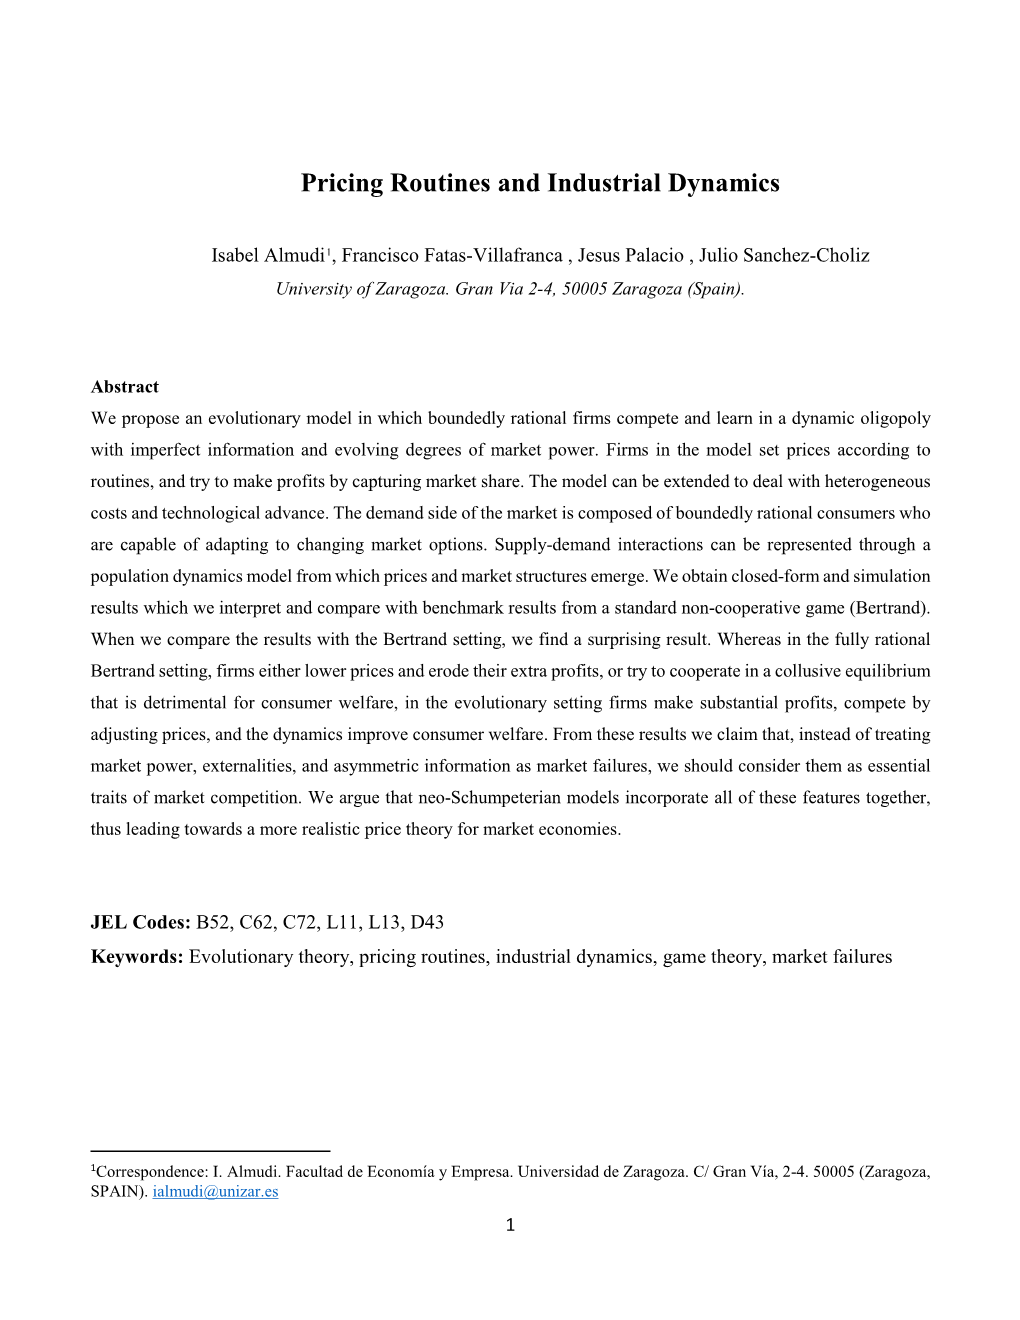 Pricing Routines and Industrial Dynamics